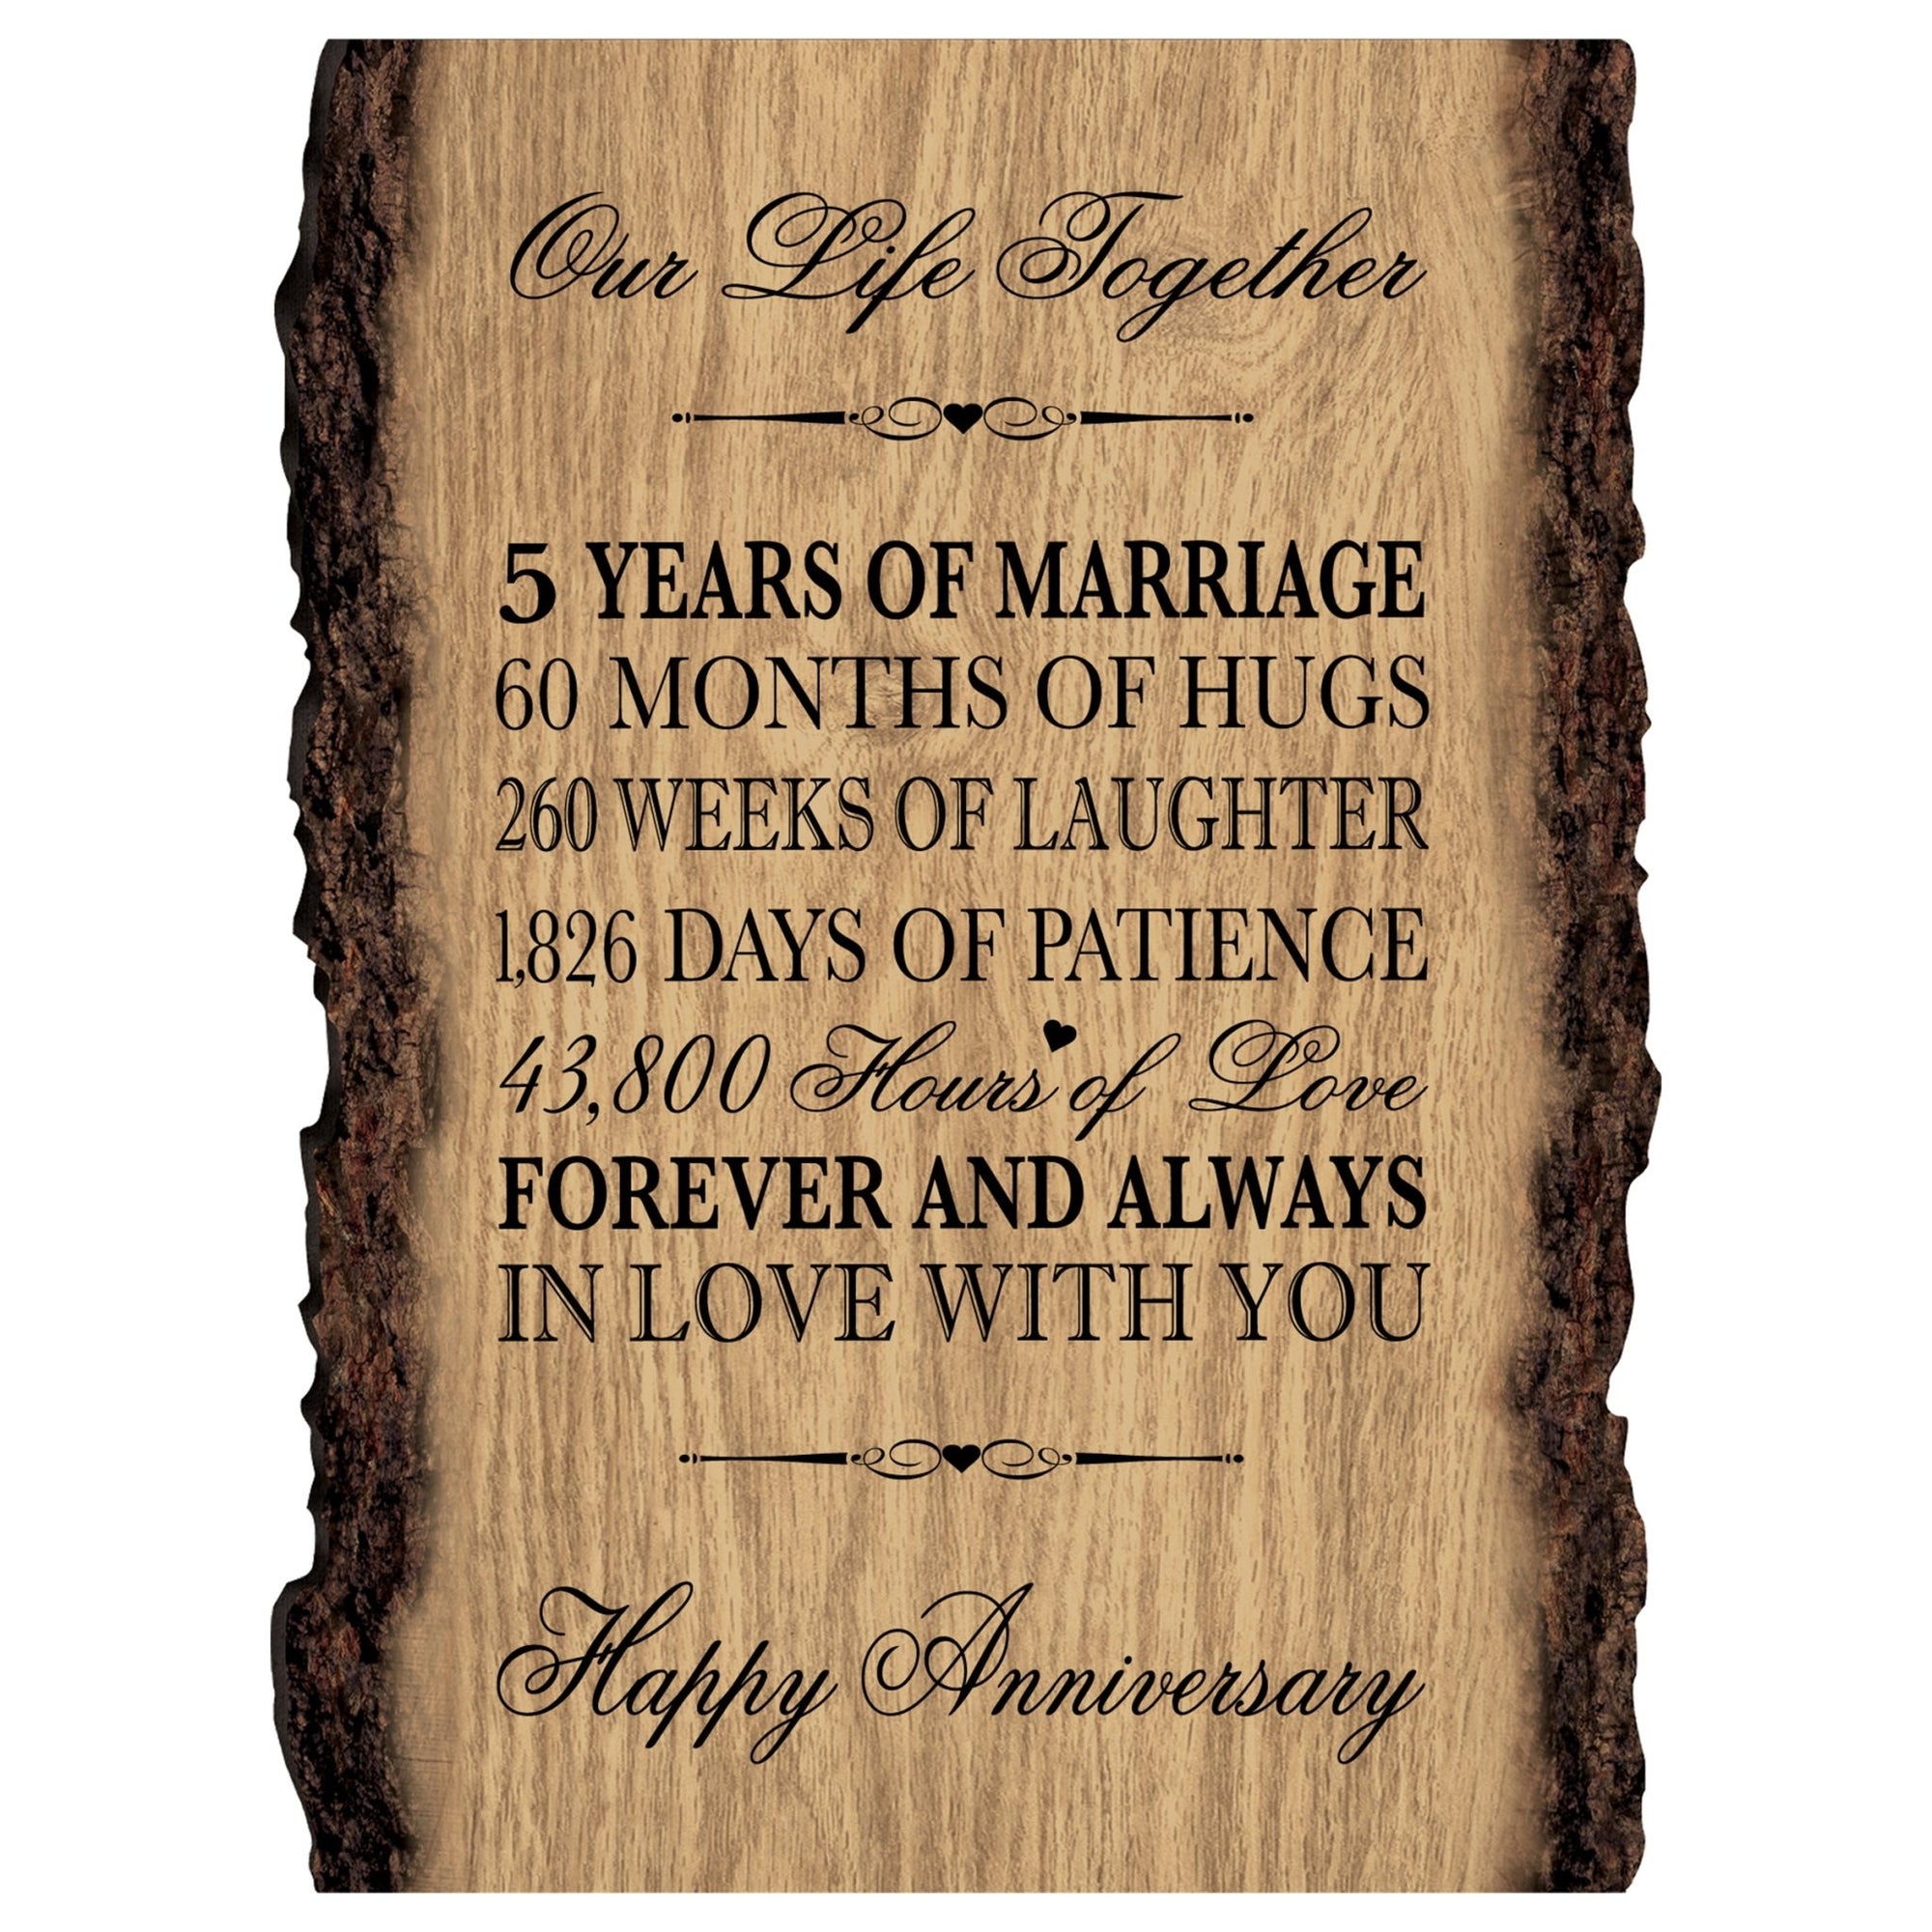 Rustic Wedding Anniversary 9x12 Barky Wall Plaque Gift For Parents, Grandparents New Couple - 5 Years Of Marriage - LifeSong Milestones